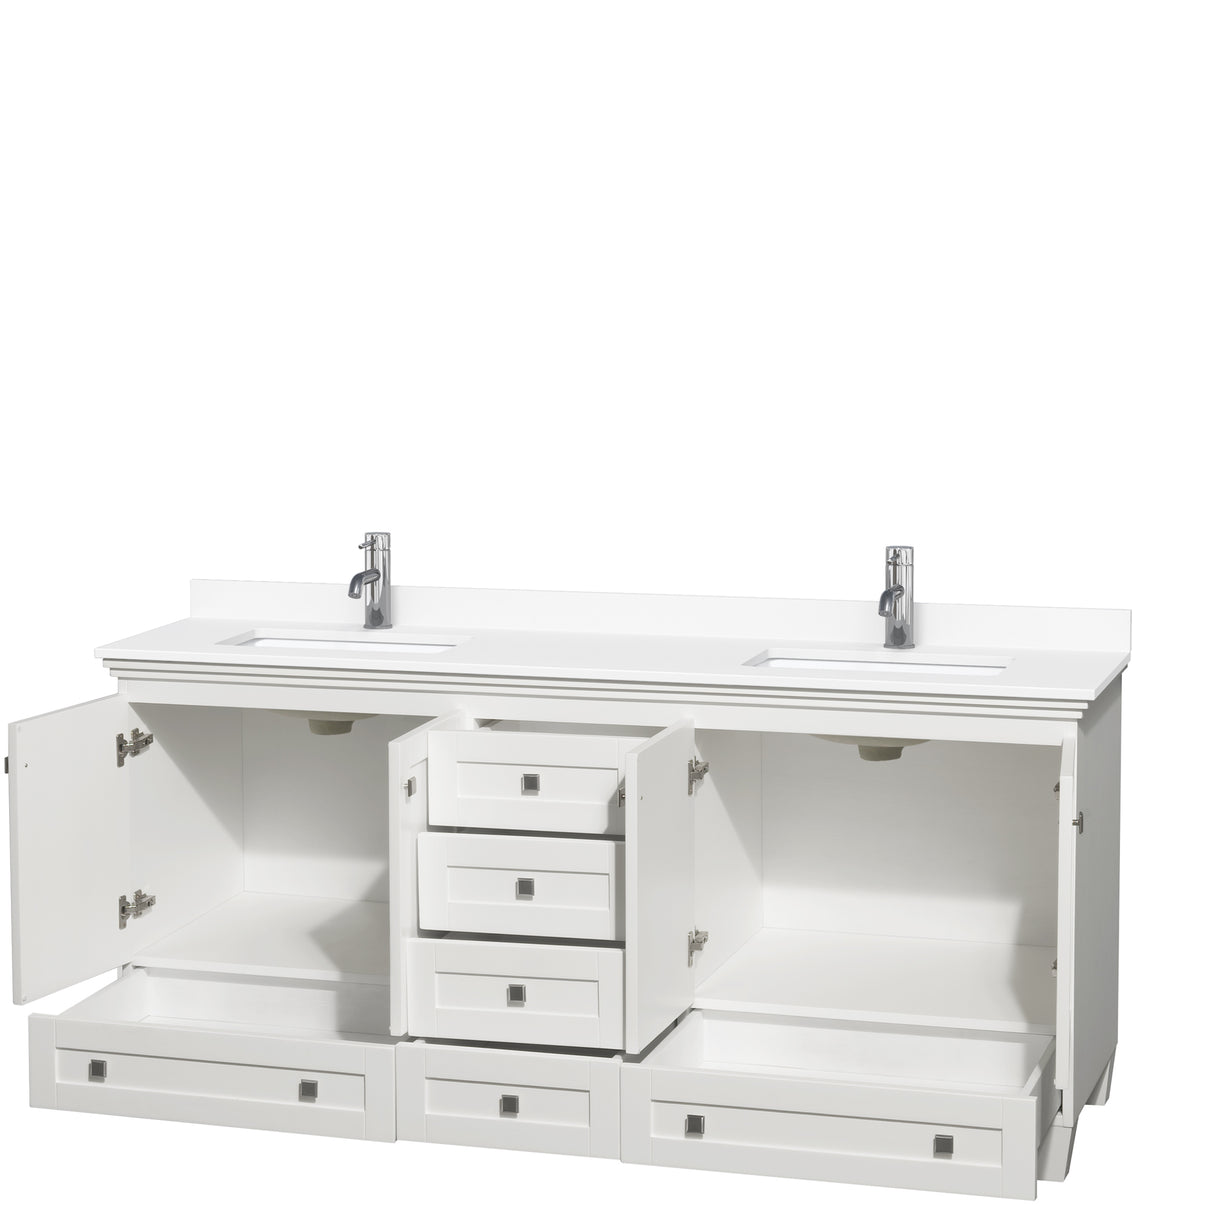 Acclaim 72 Inch Double Bathroom Vanity in White White Cultured Marble Countertop Undermount Square Sinks No Mirrors